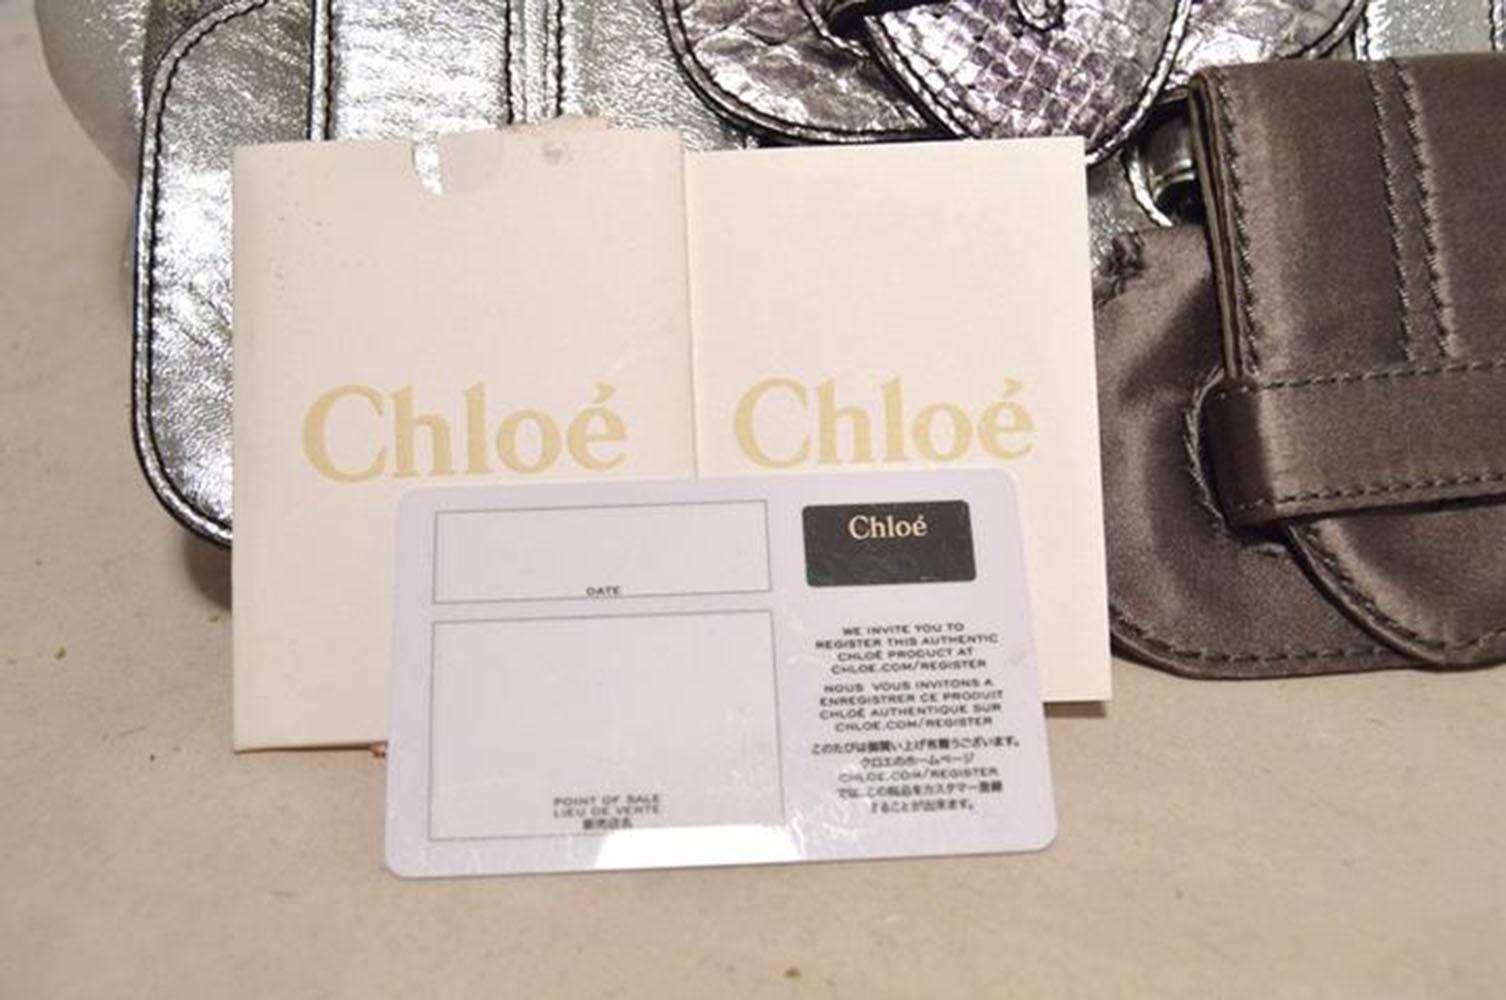 Fabulous CHLOE silver buckled shoulder bag in excellent condition. Silver leather, satin, and snakeskin exterior trimmed with a leather and satin shoulder strap and front flap design that features an arrangement of faux buckles. Front flap opens to